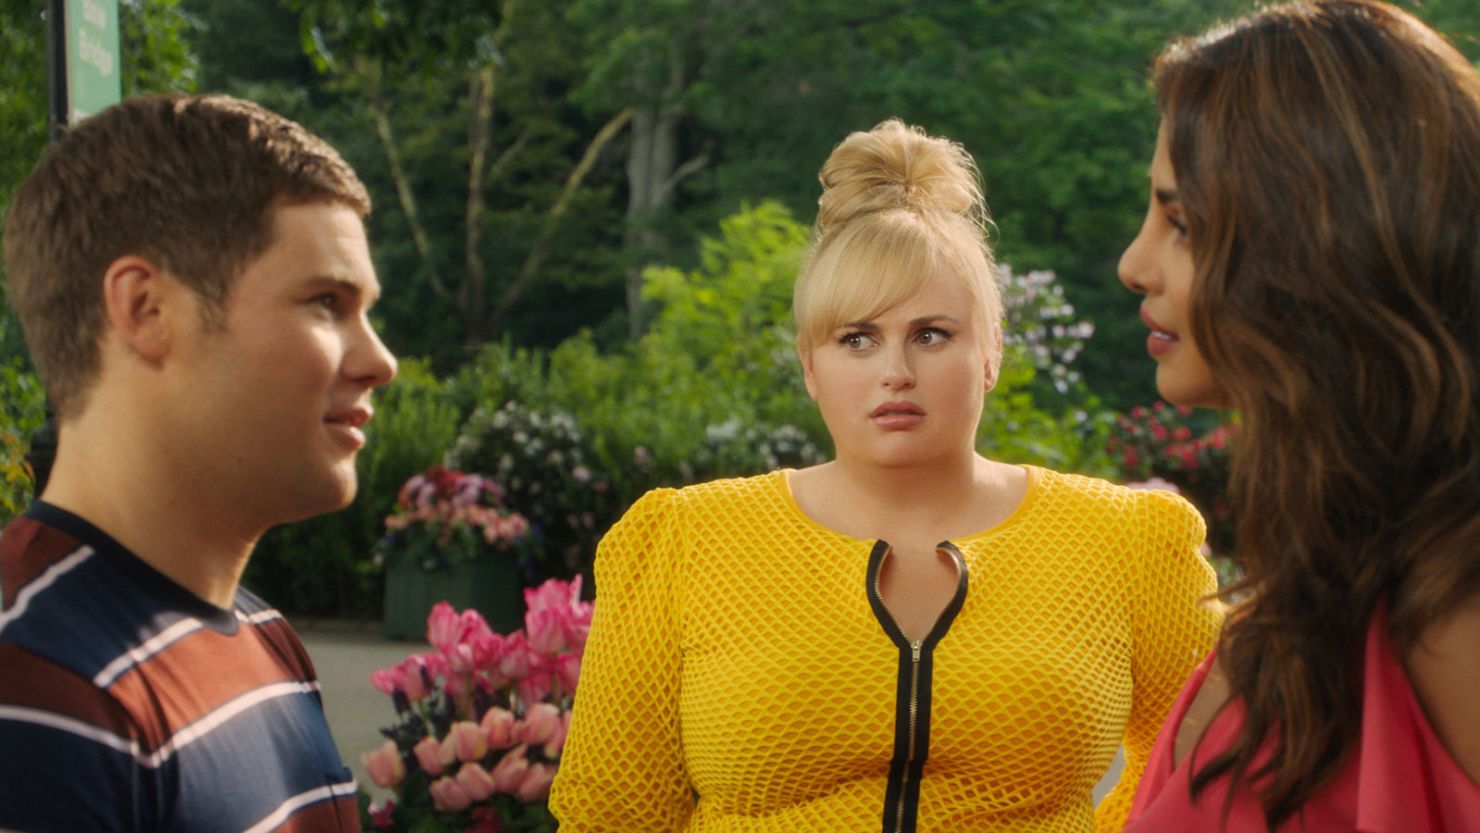 Rebel Wilson stoked controversy with comments about her role in the upcoming film "Isn't it Romantic."